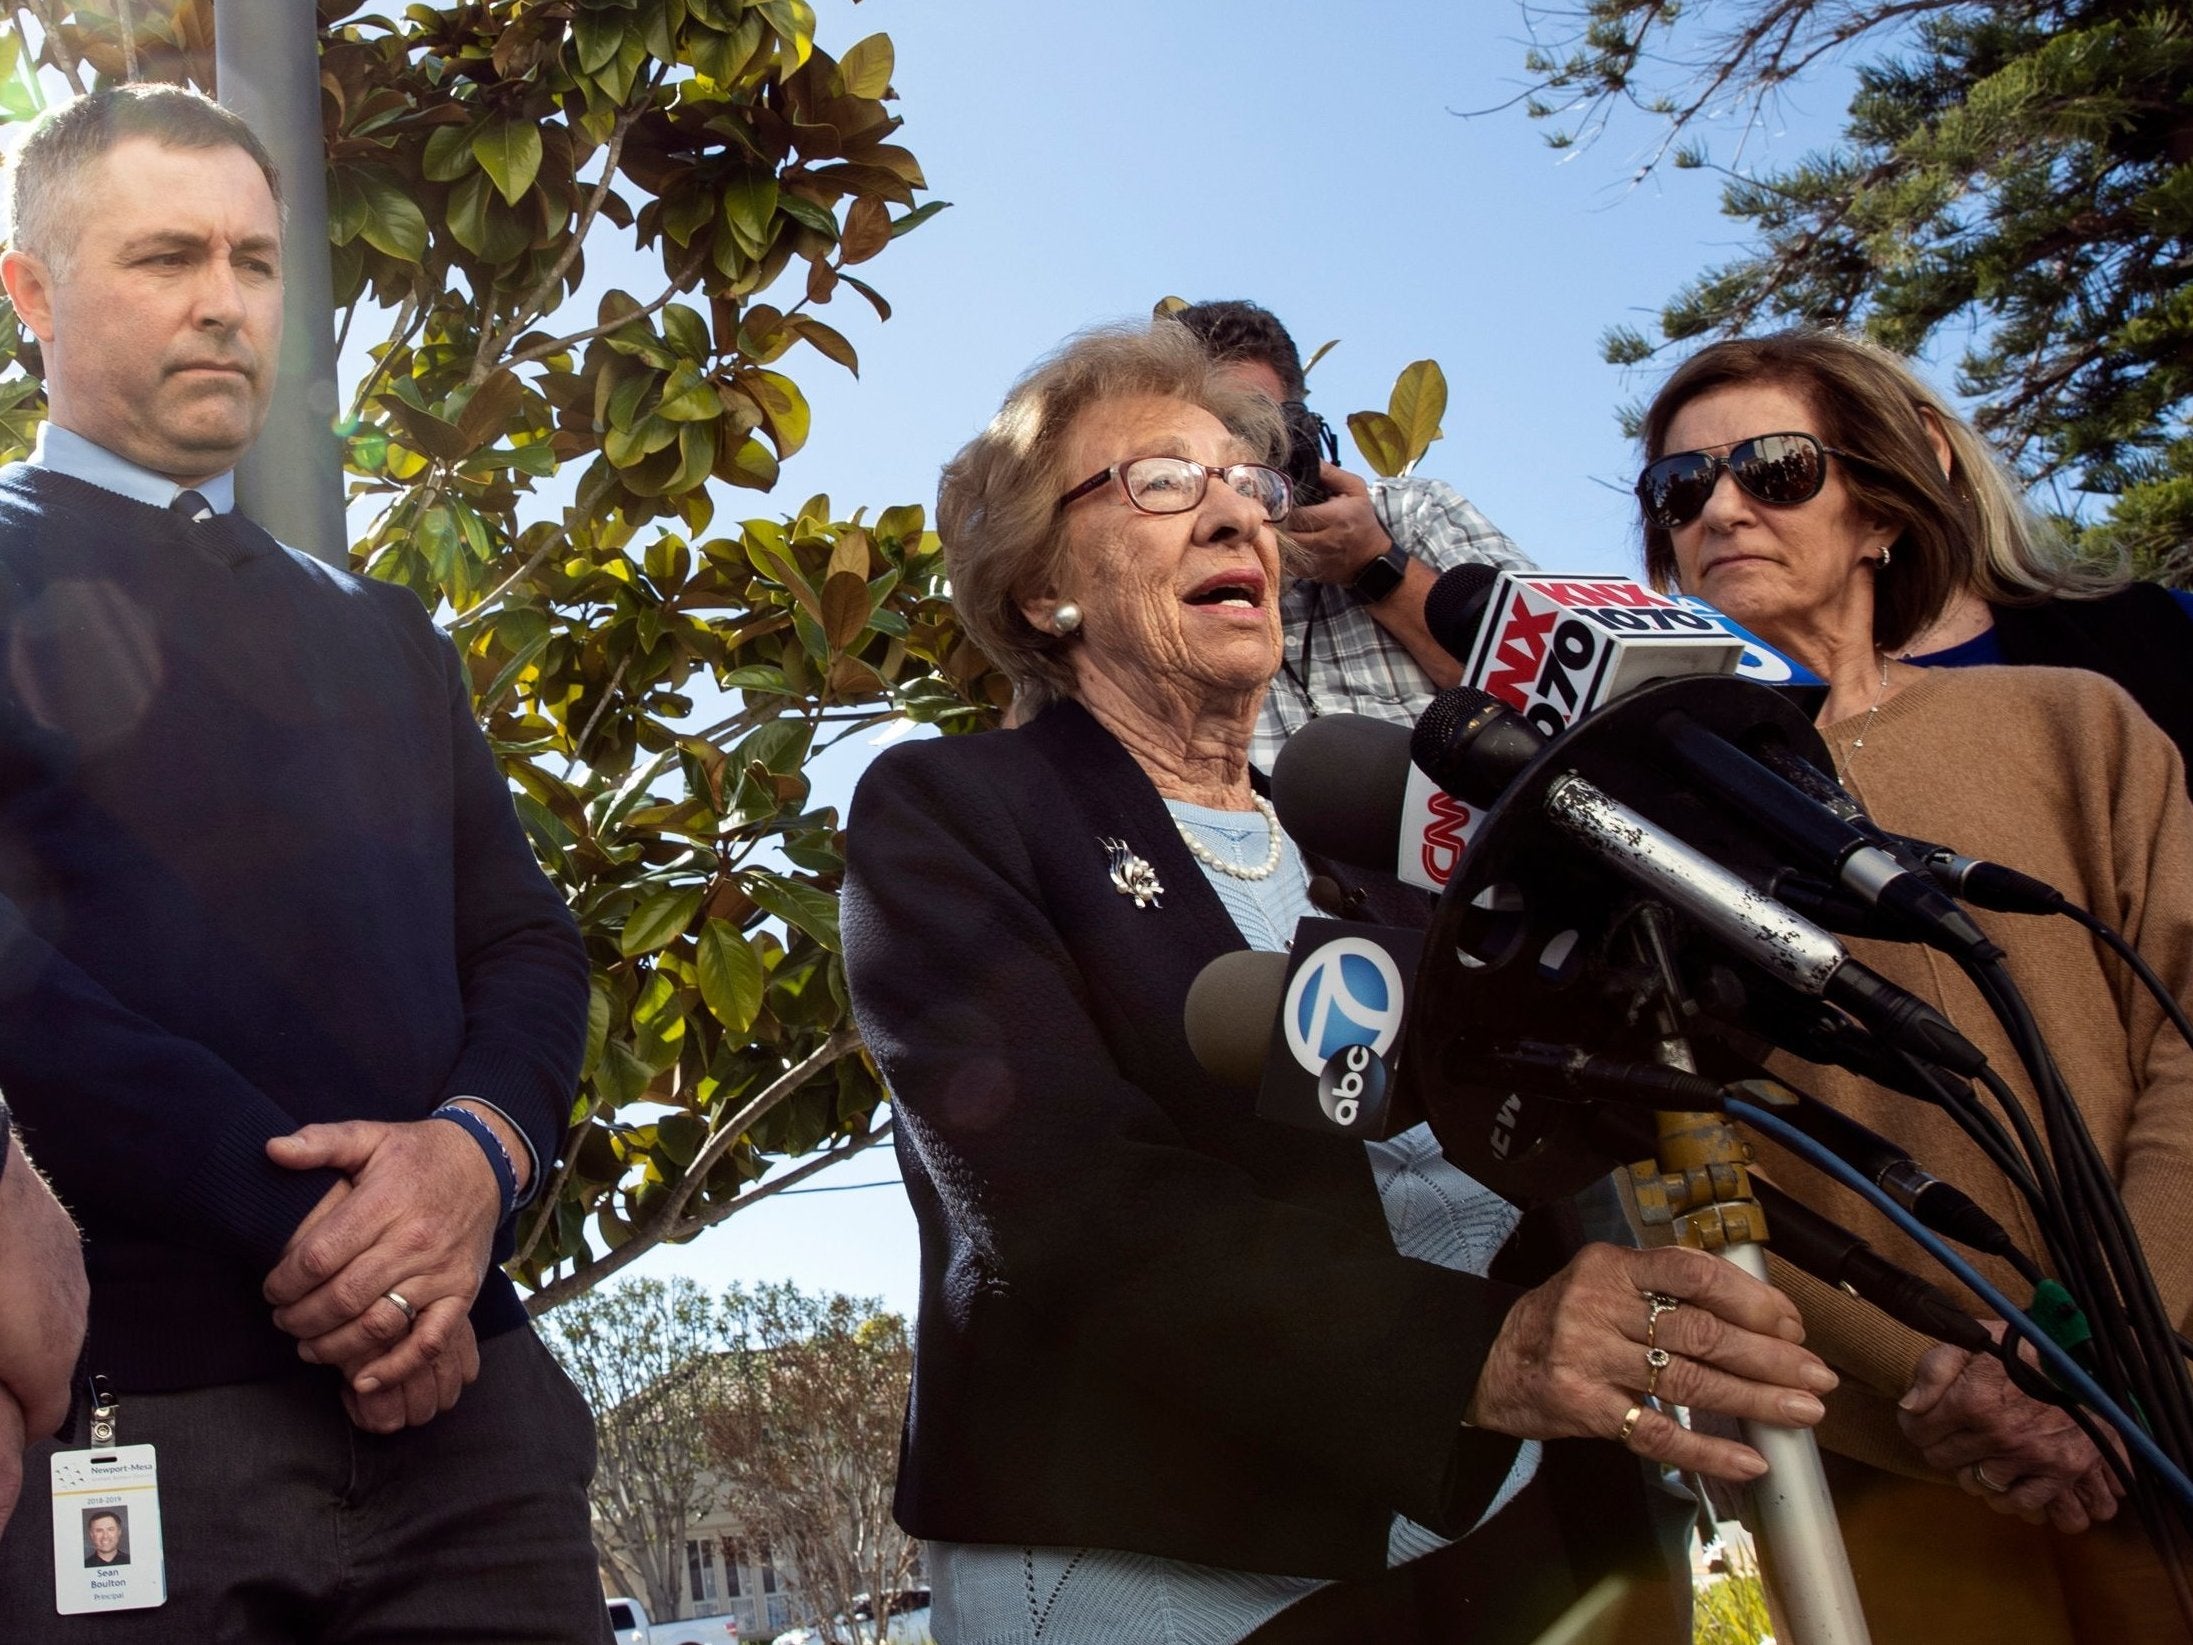 Auschwitz survivor and Anne Frank's stepsister, Eva Schloss delivers a speech to the media after she addressed Newport Beach High School students following a 'Nazi salutes and Swastika' incident earlier on the same week, in Newport Beach, California, 7 March 2019.